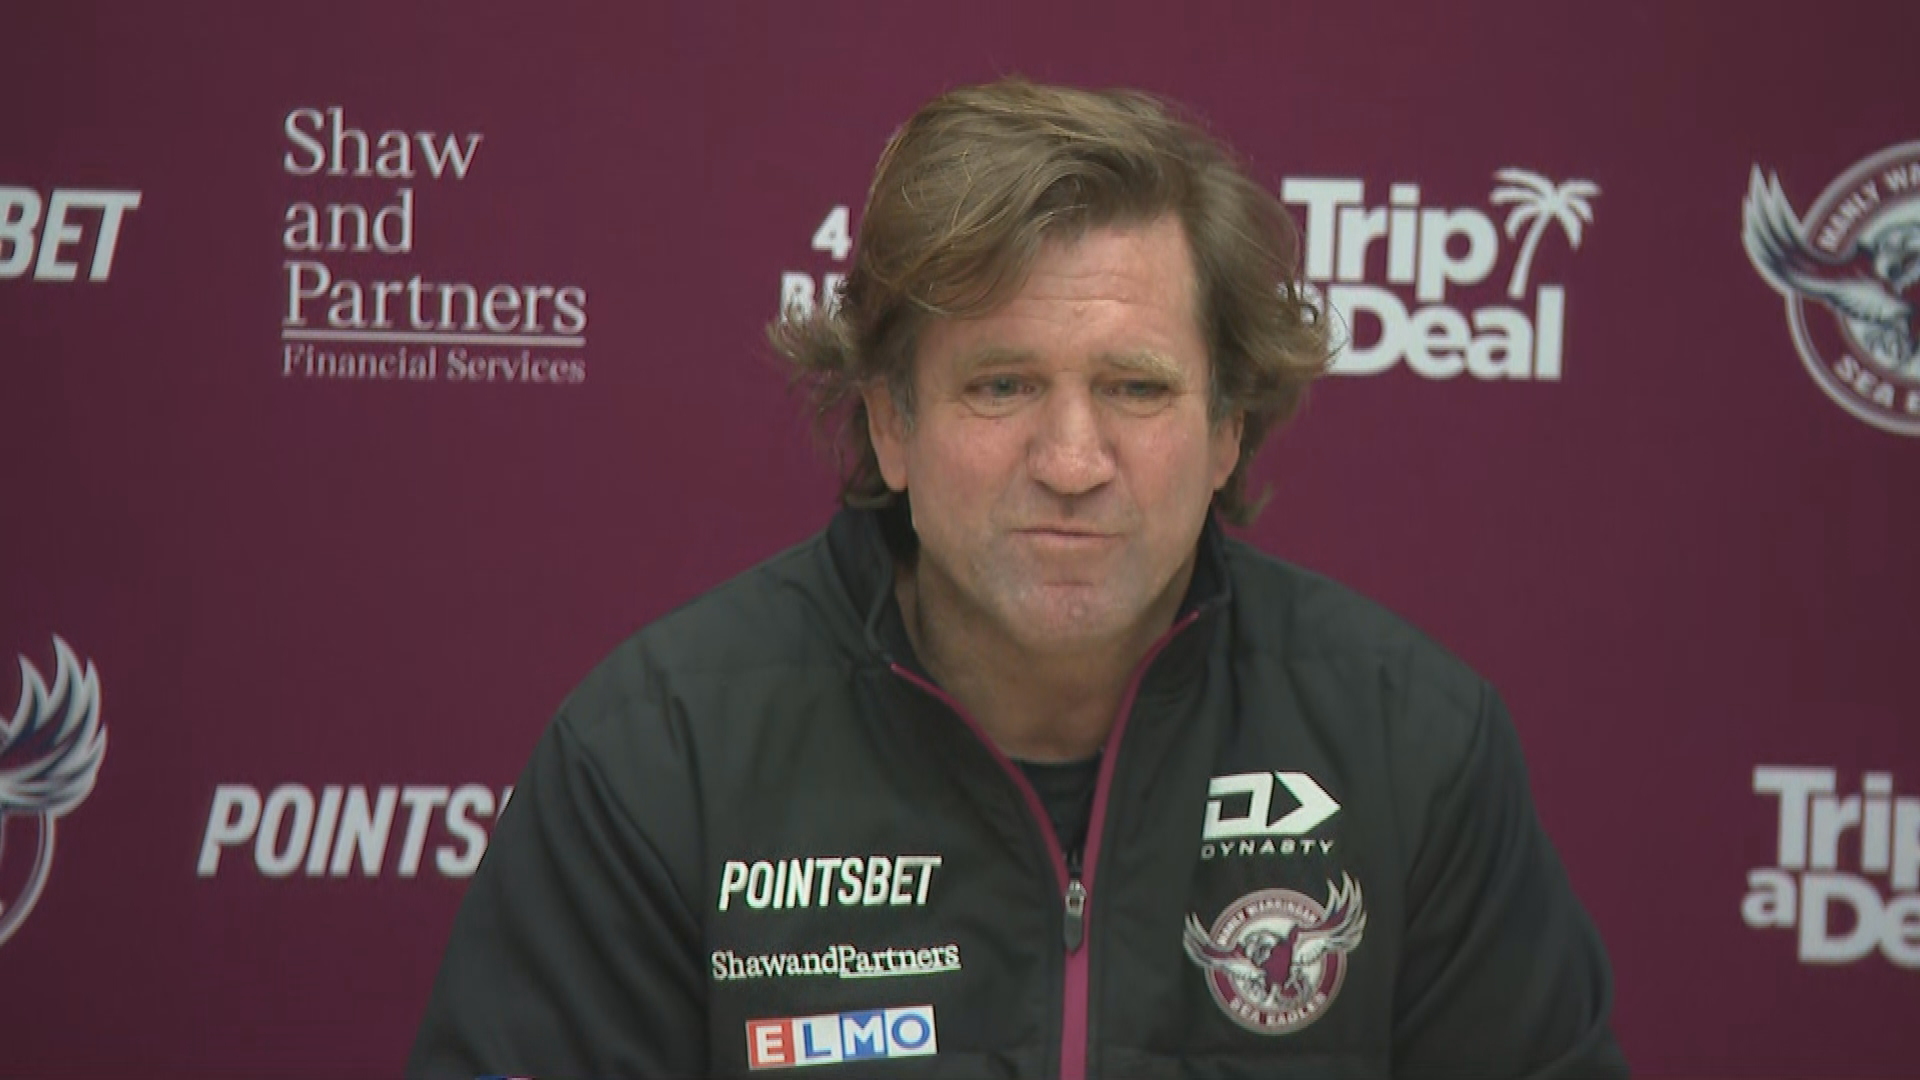 Manly Sea Eagles coach Des Hasler speaks about the club's pride jersey saga.